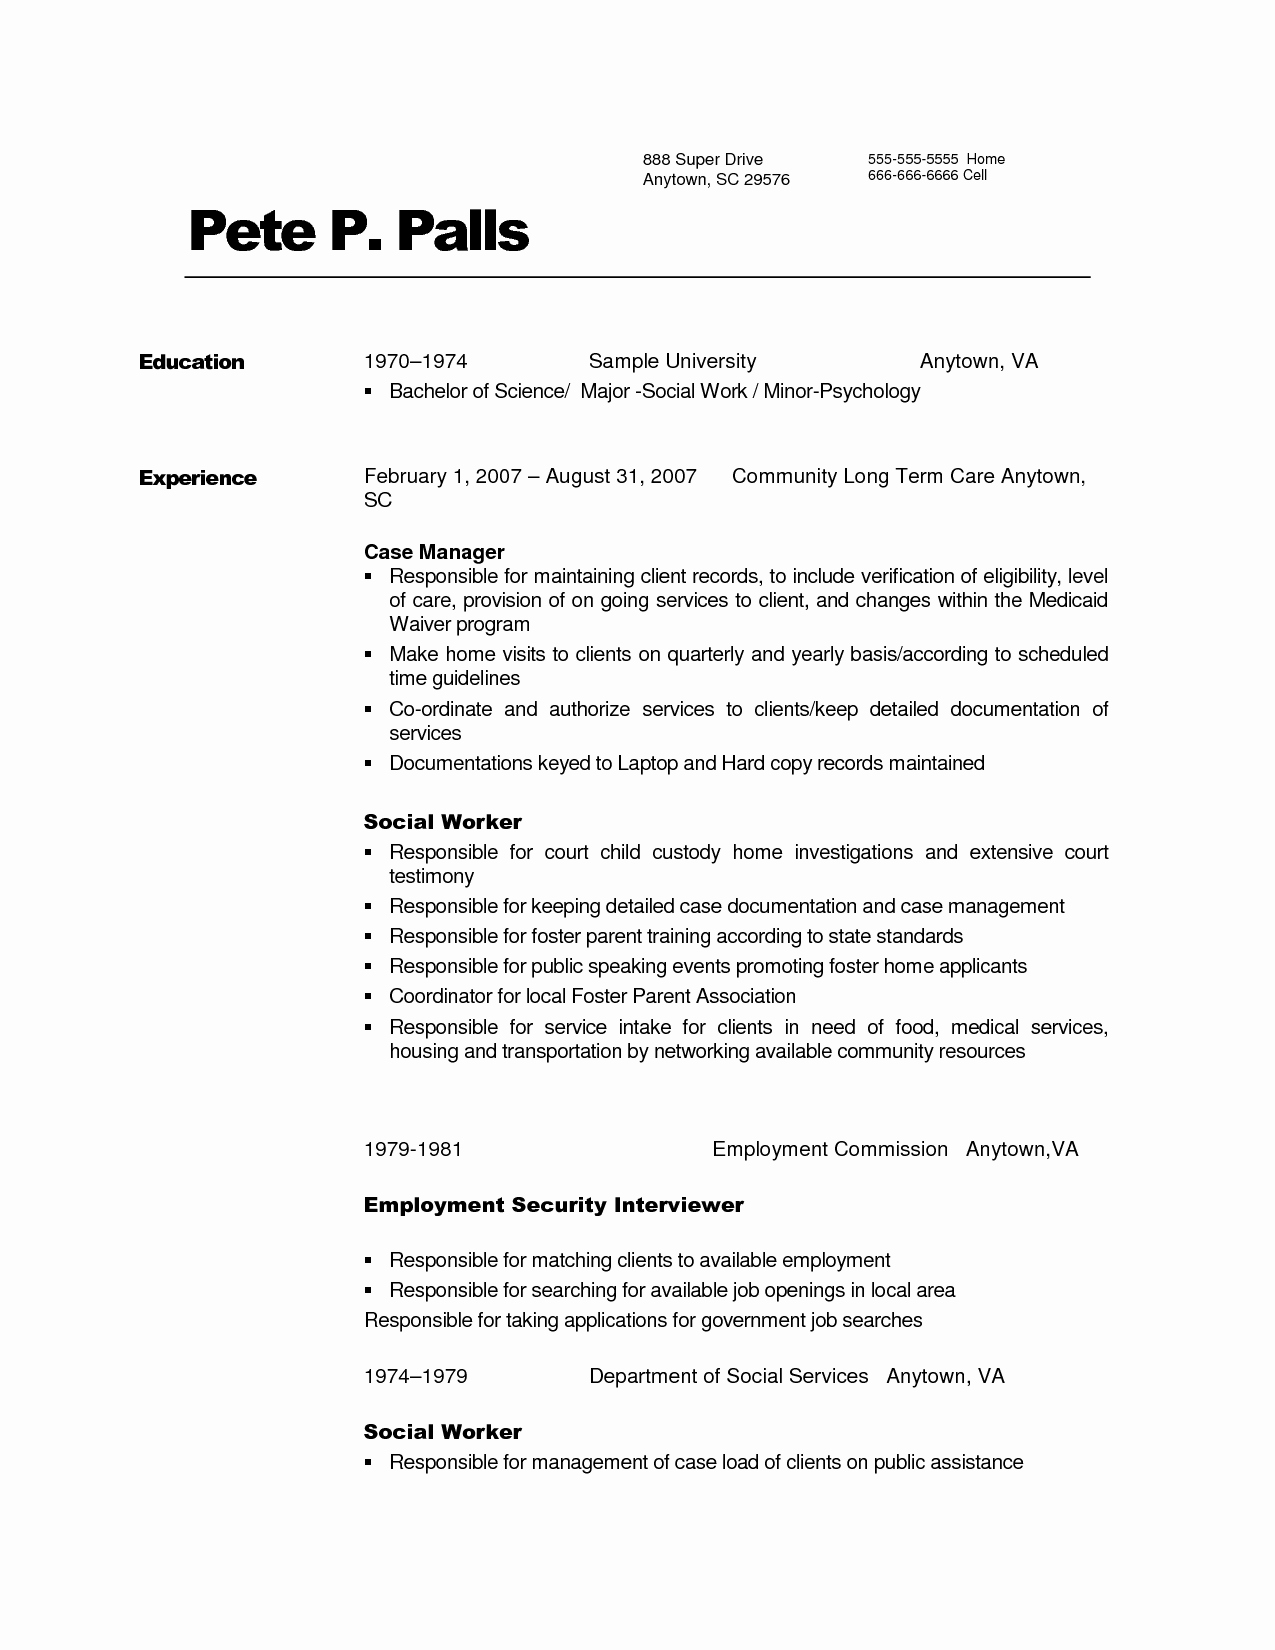 Social Worker Resume Example with Experience Free Download